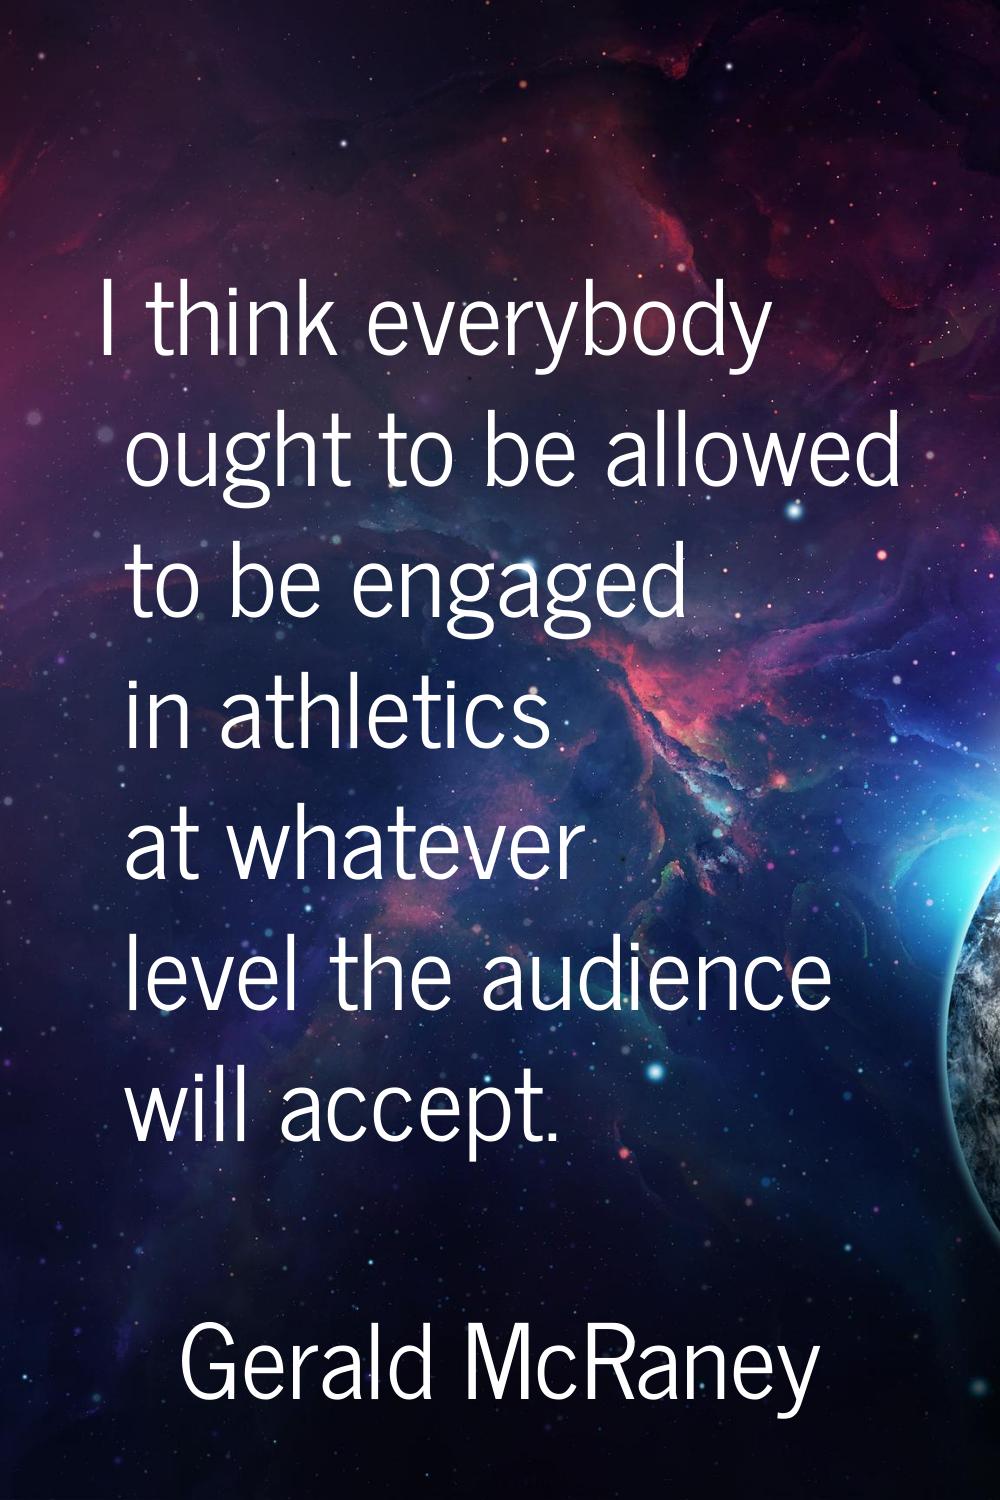 I think everybody ought to be allowed to be engaged in athletics at whatever level the audience wil